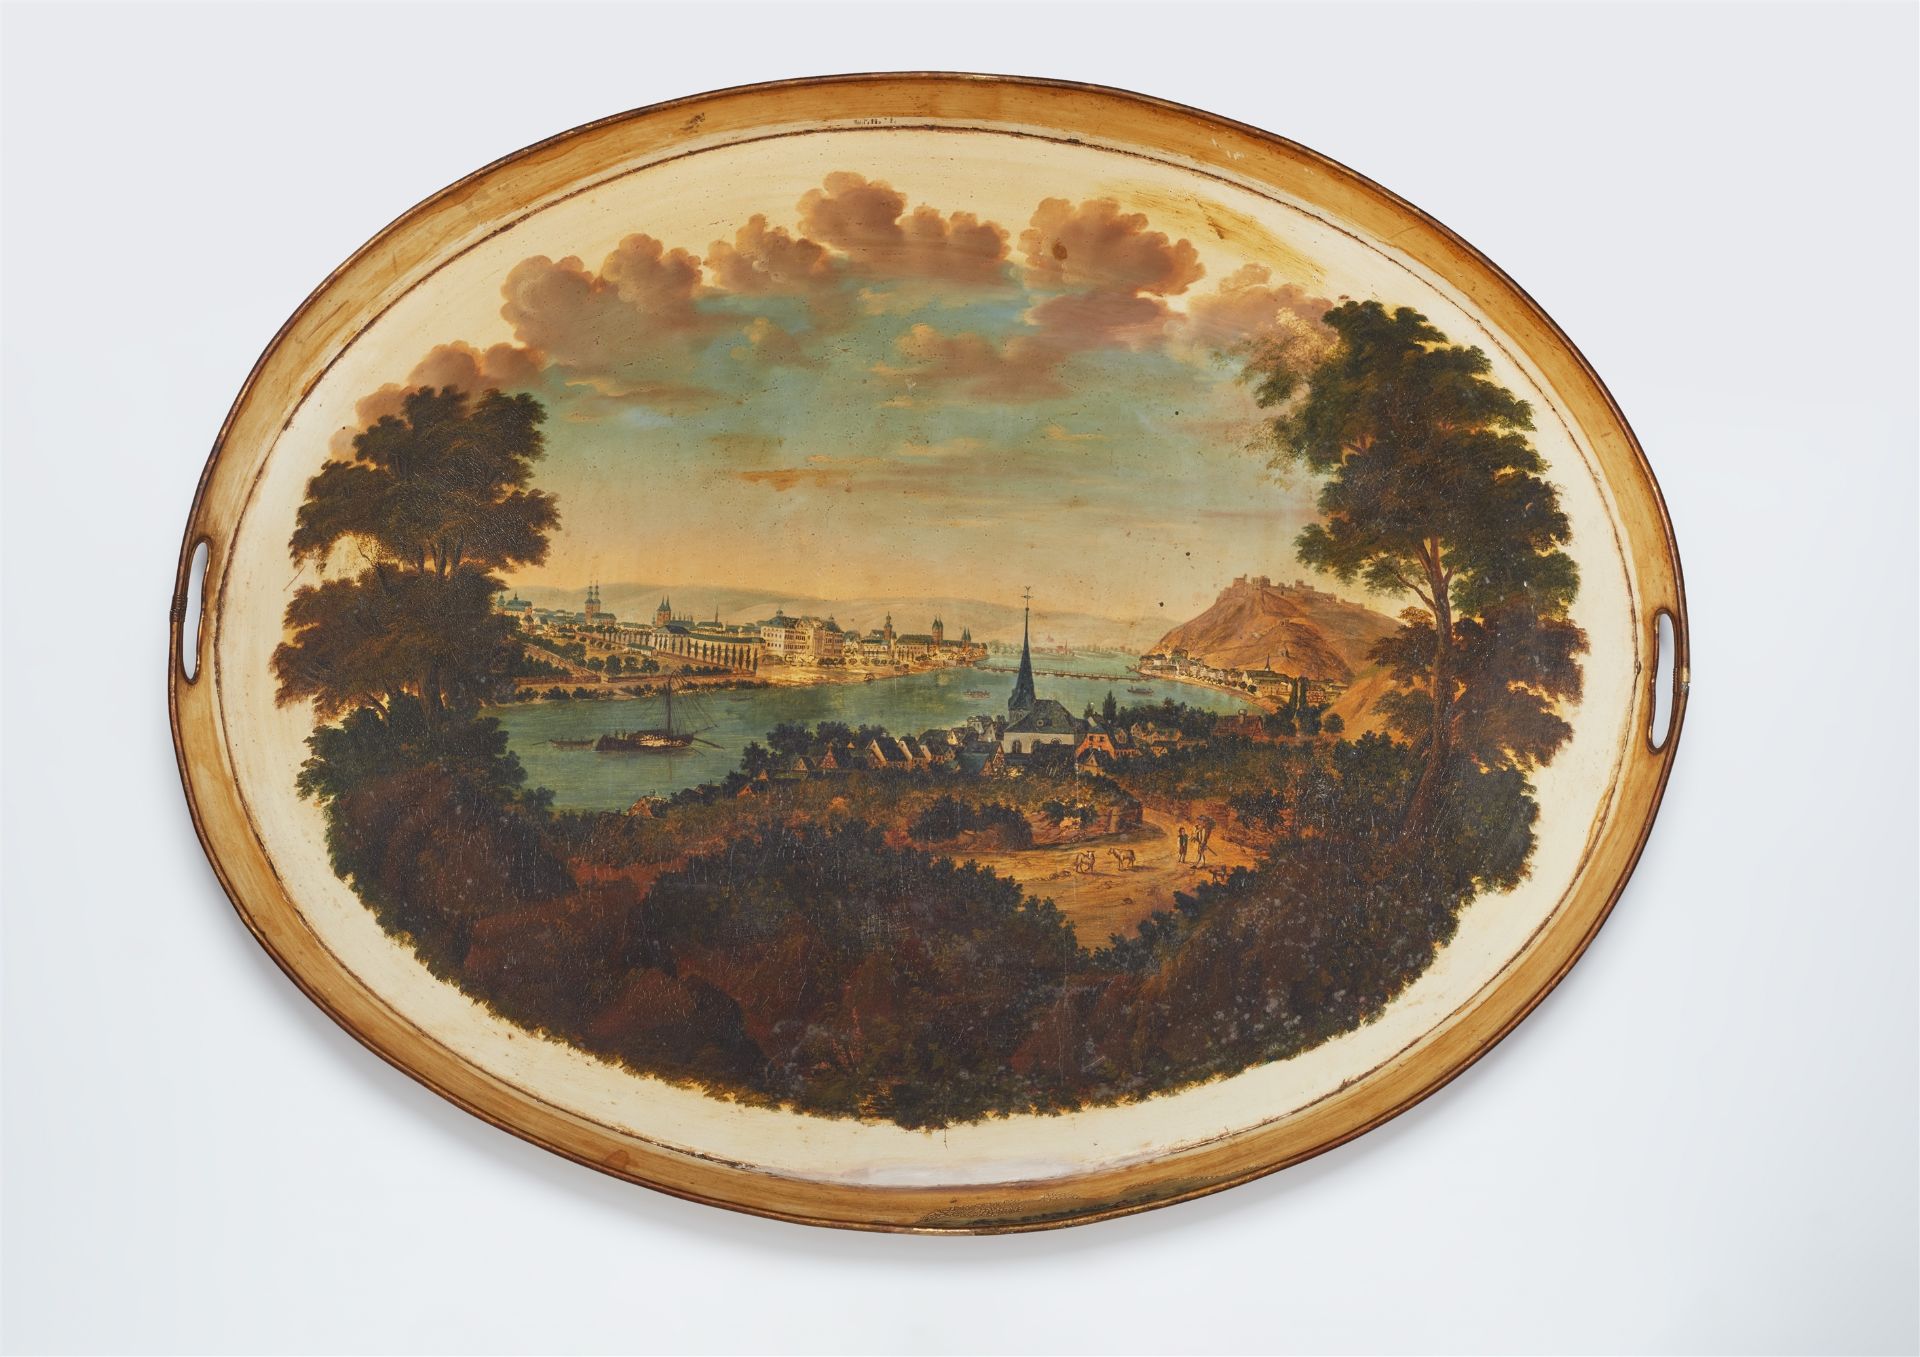 A large lacquered sheet iron tray with a view of Koblenz